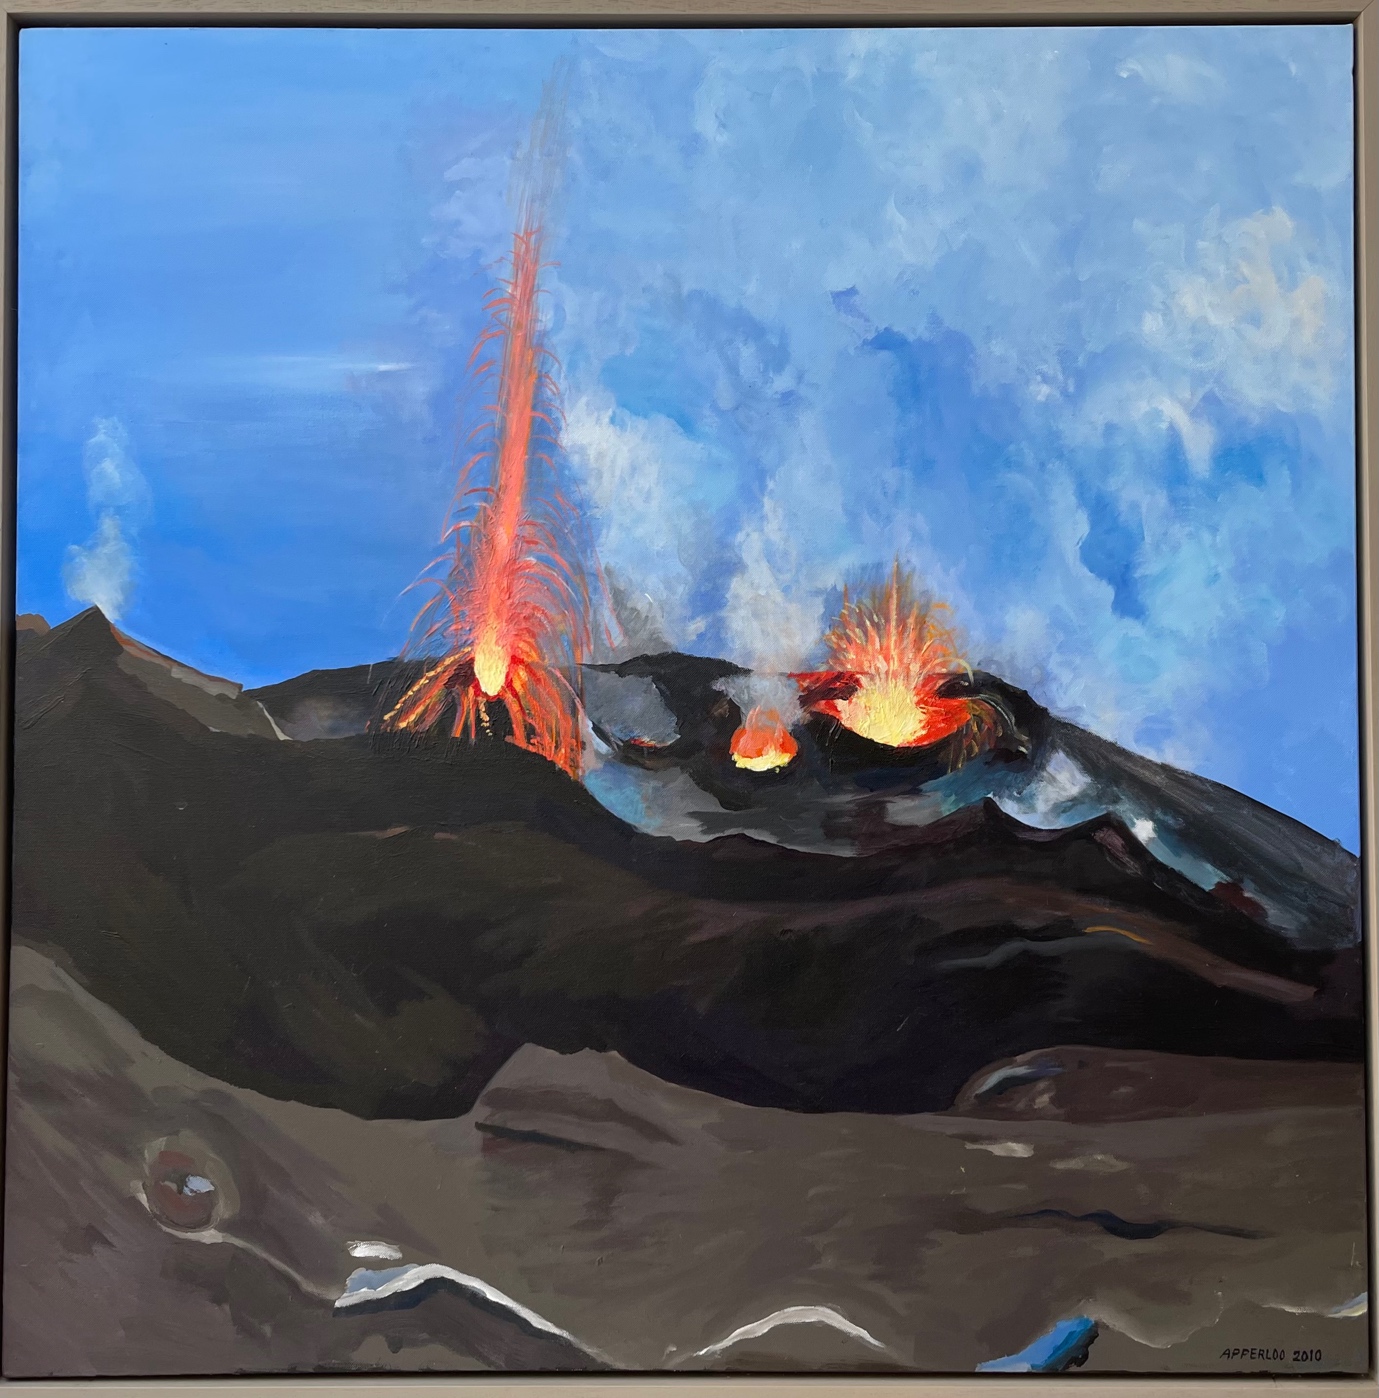 A volcano erupting with lava

Description automatically generated with low confidence